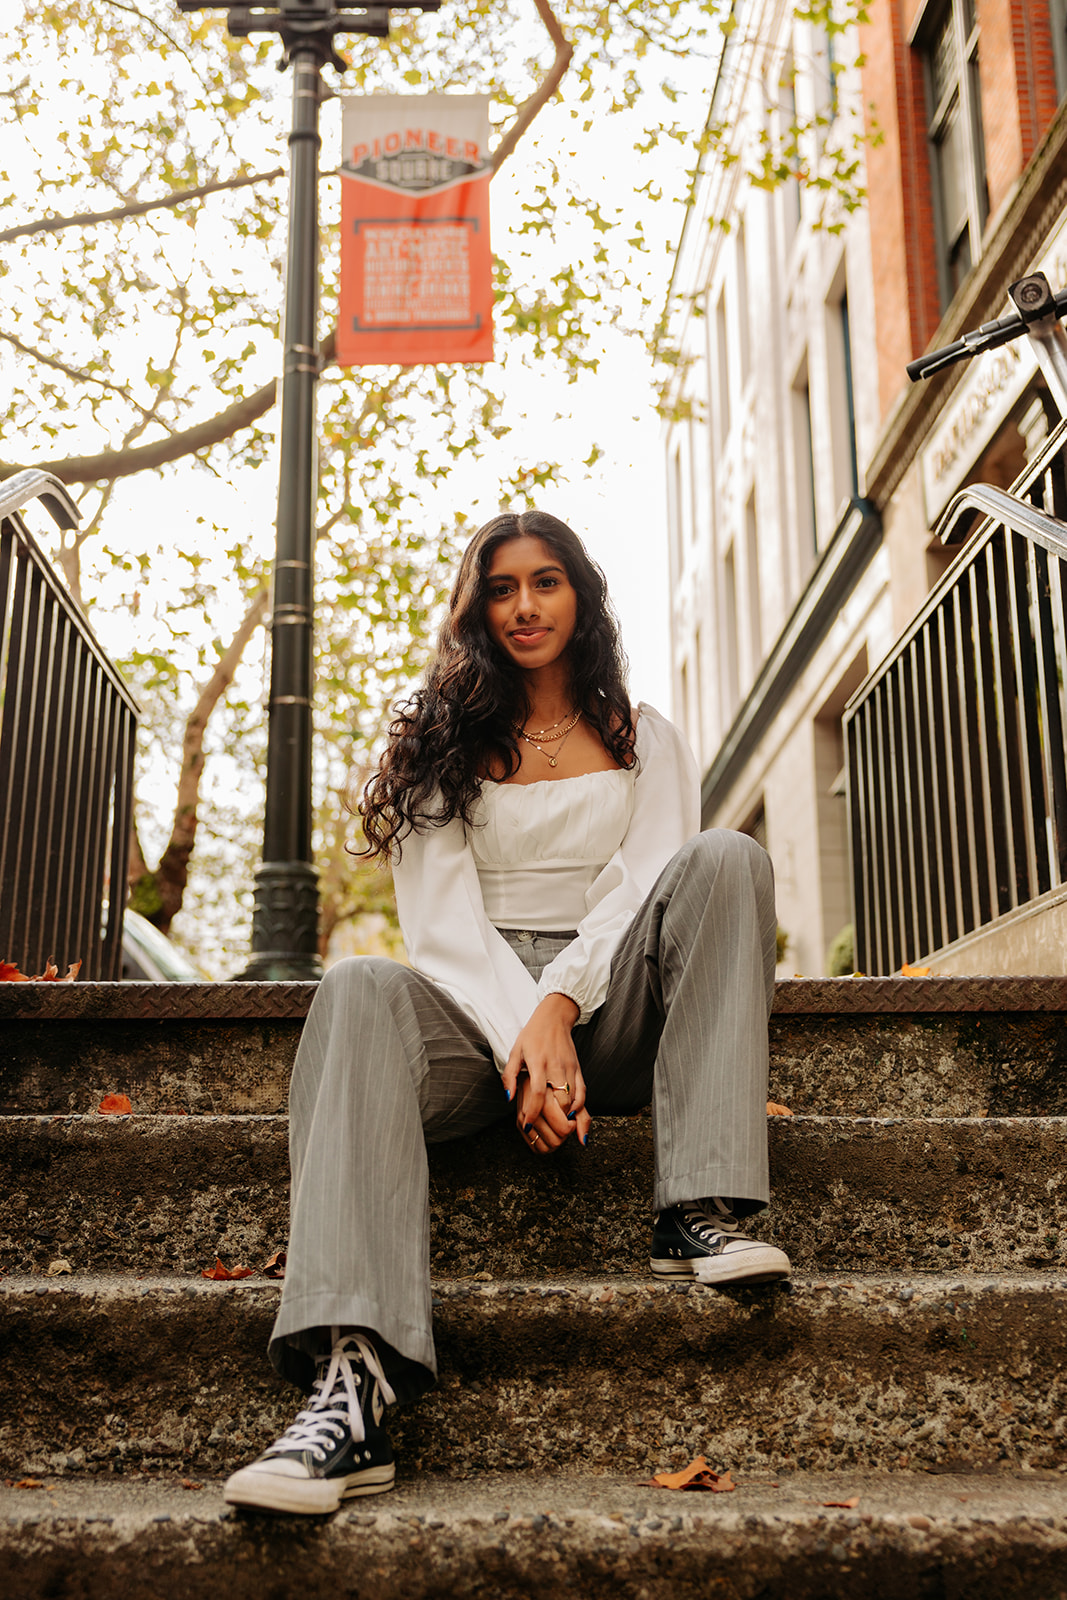 An edgy photo of an ethnic high school senior girl posing on concrete steps in Pioneer Square, Seattle.